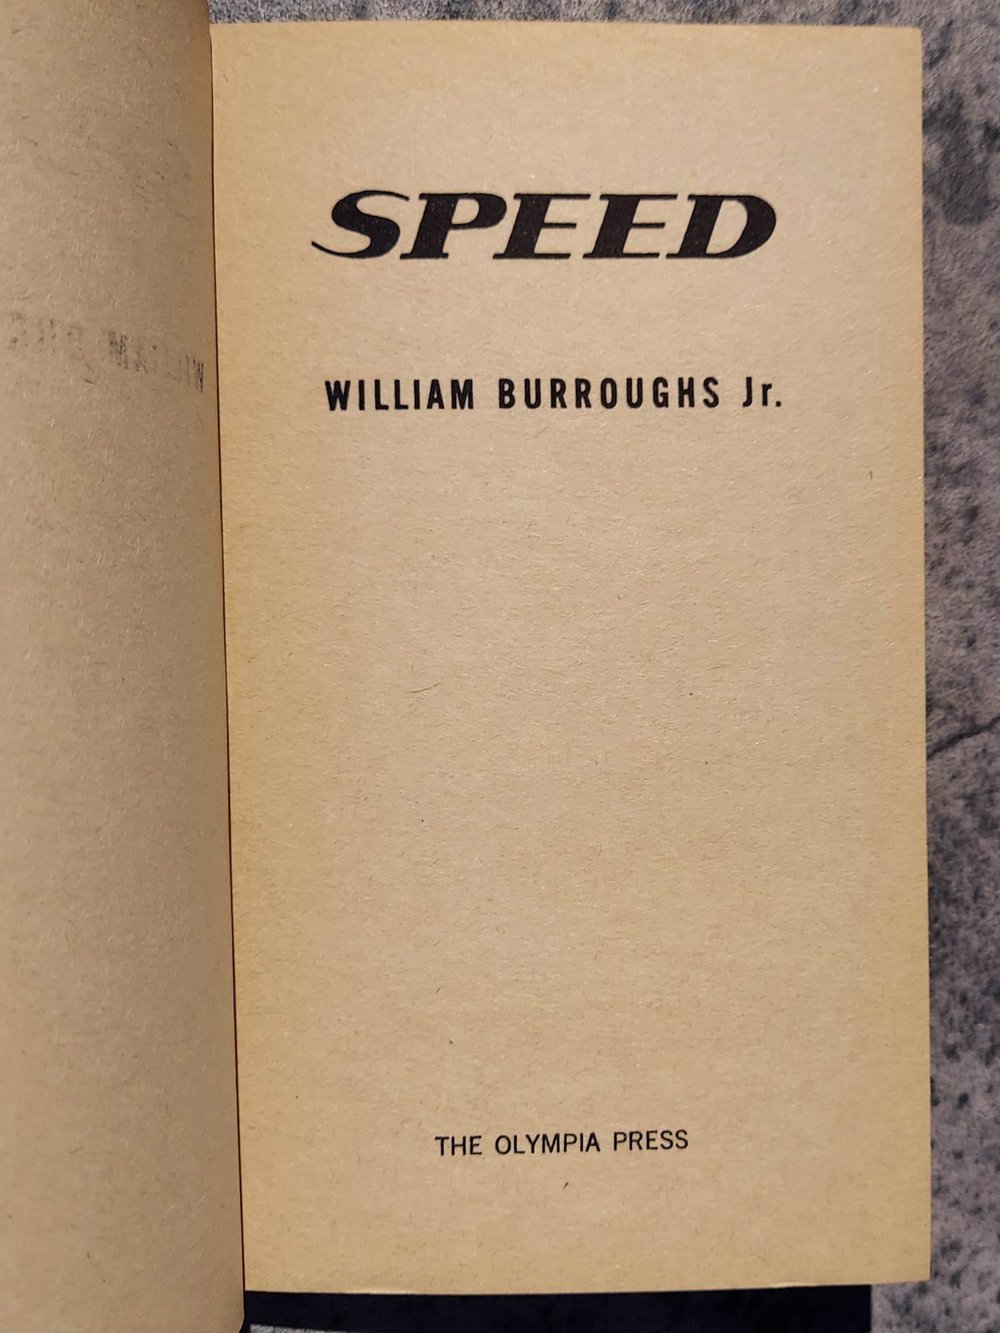 Speed, by William S. Burroughs Jr.